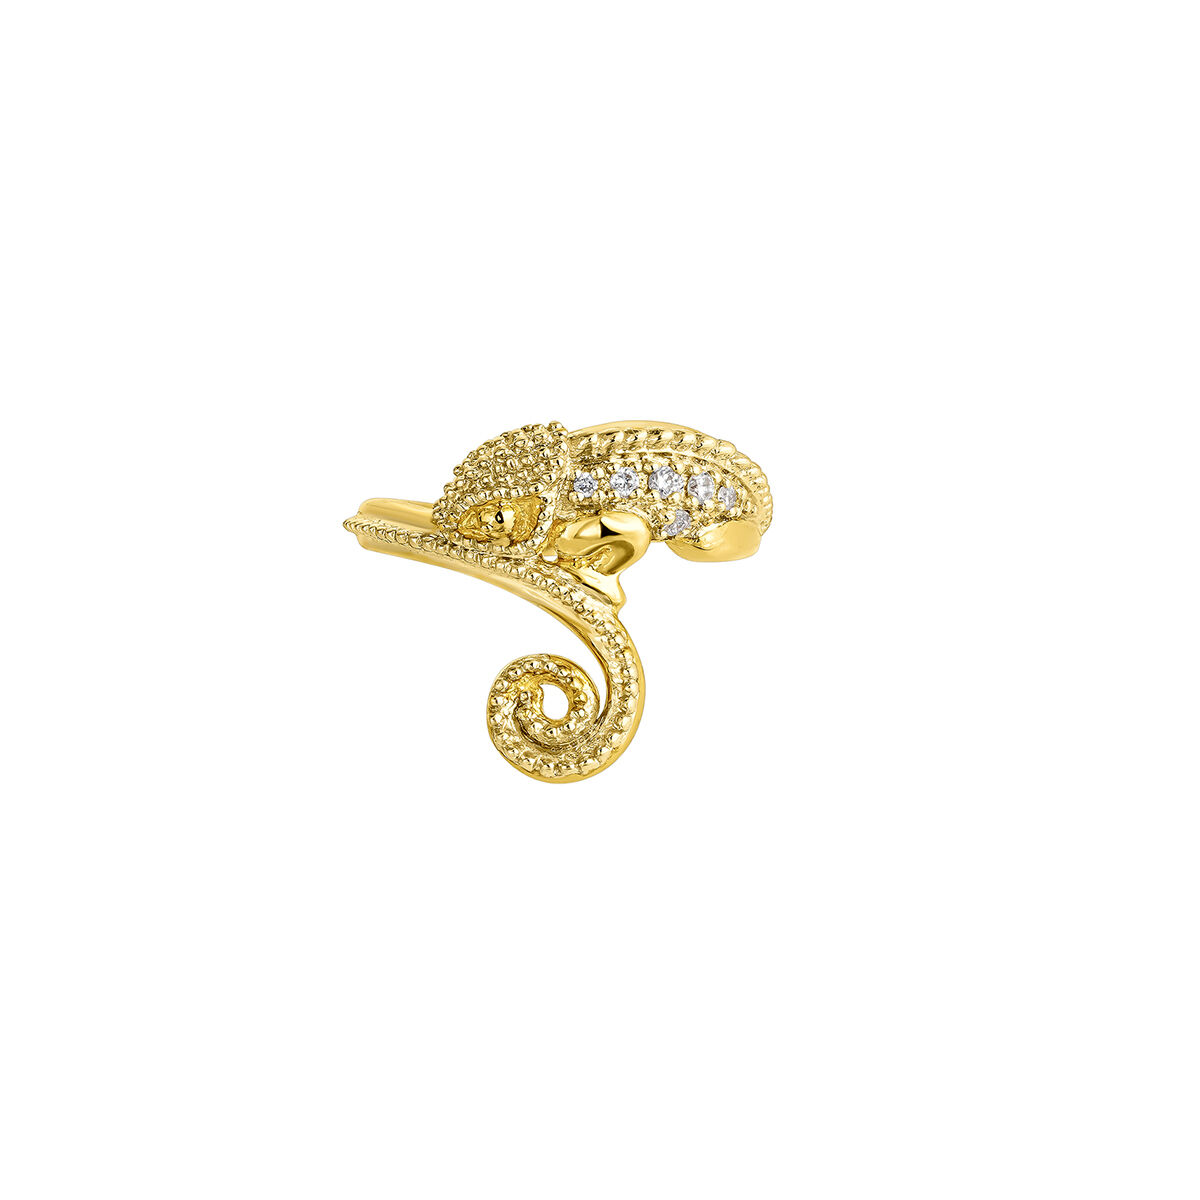 Chameleon ear cuff in 18k yellow gold with diamonds, J05094-02-H, hi-res